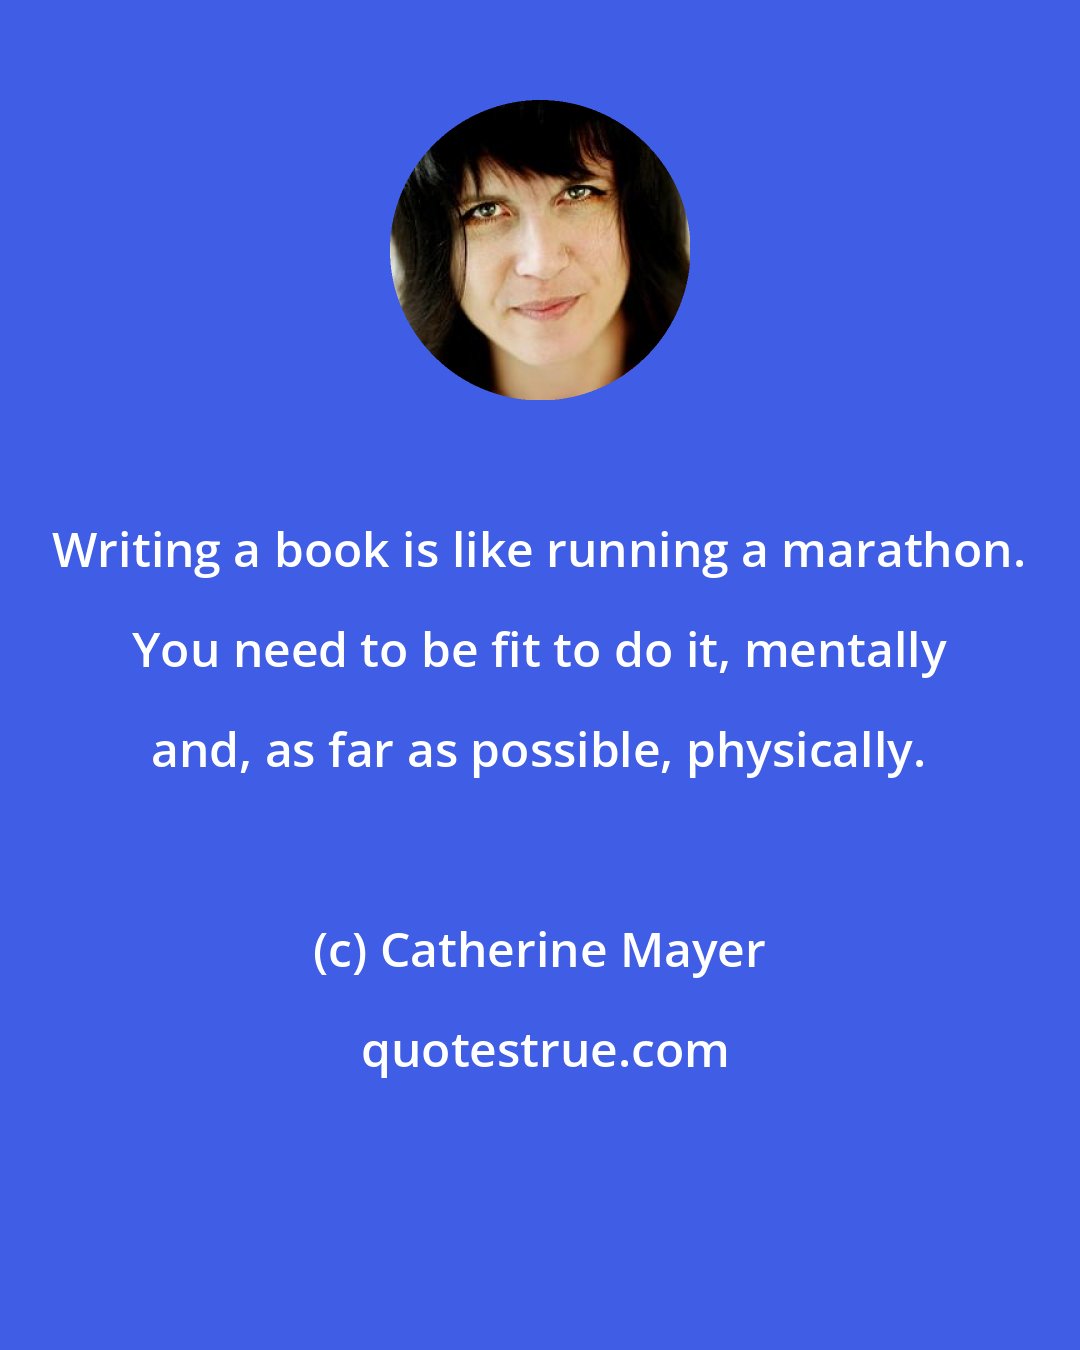 Catherine Mayer: Writing a book is like running a marathon. You need to be fit to do it, mentally and, as far as possible, physically.